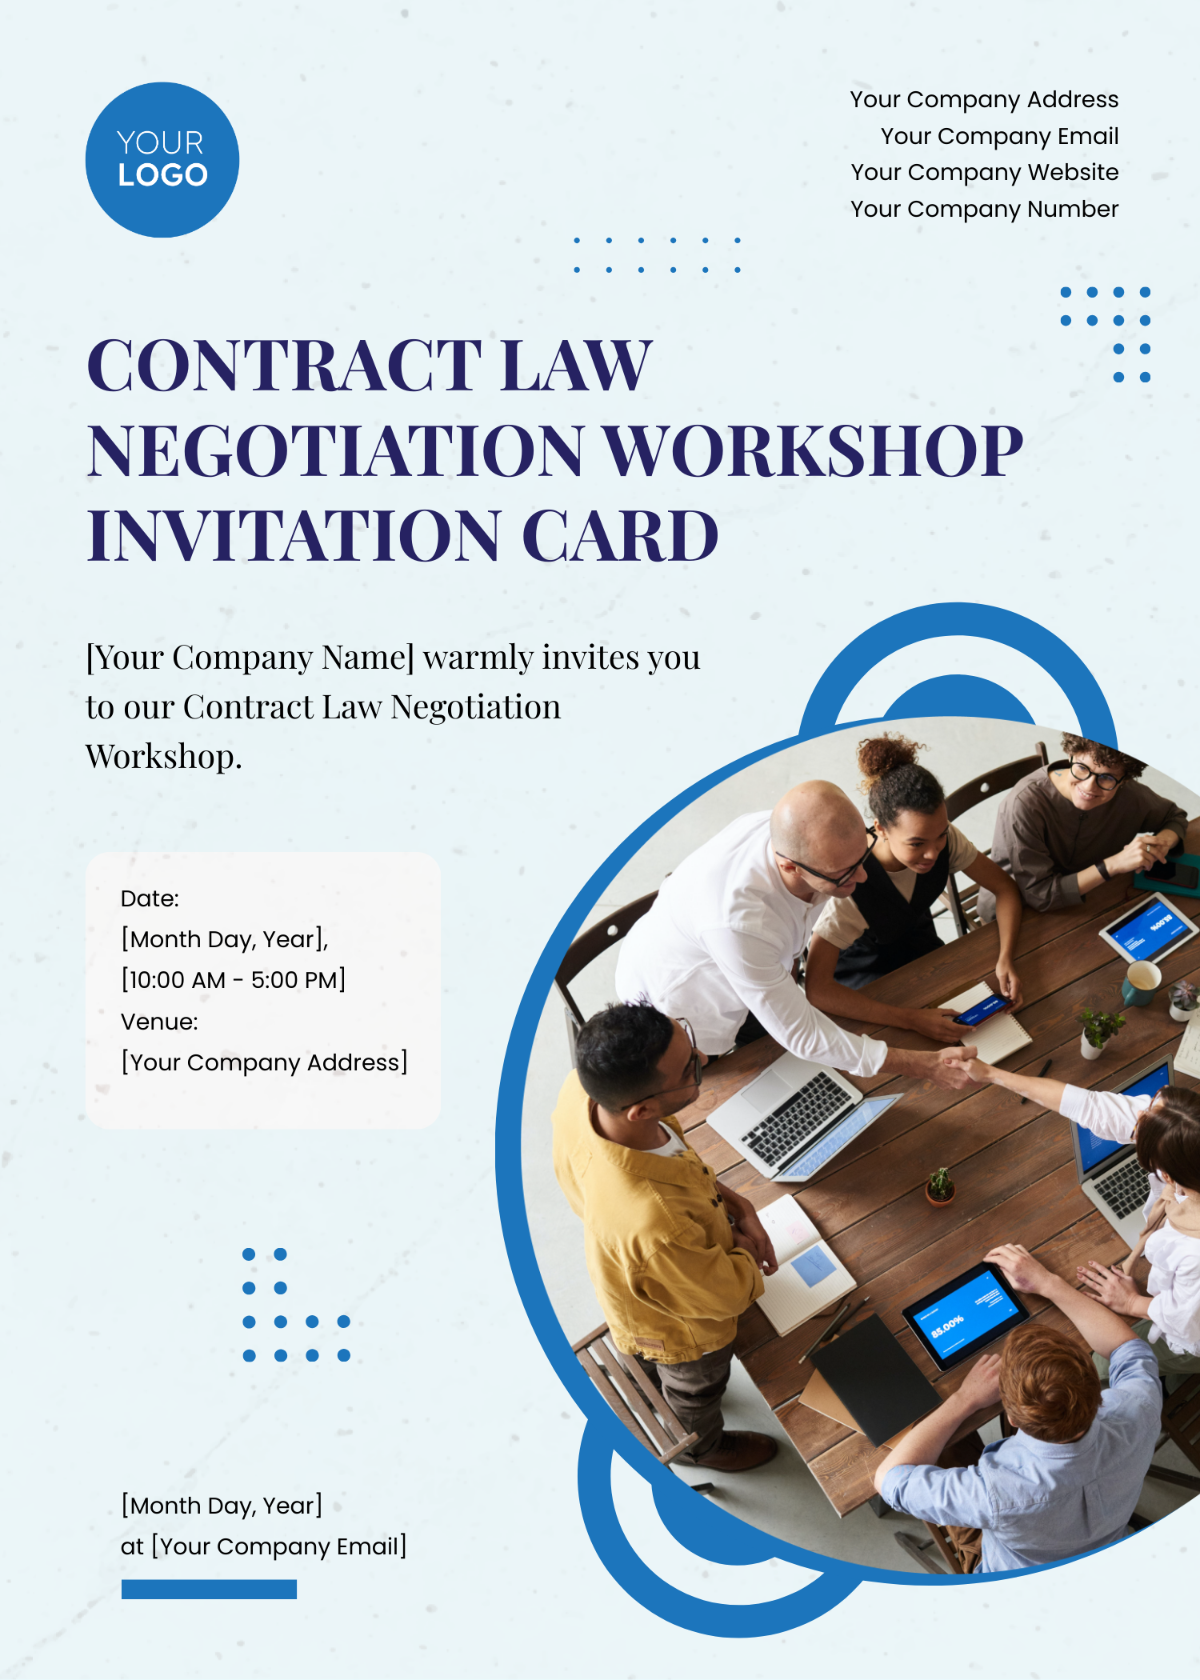 Contract Law Negotiation Workshop Invitation Card Template